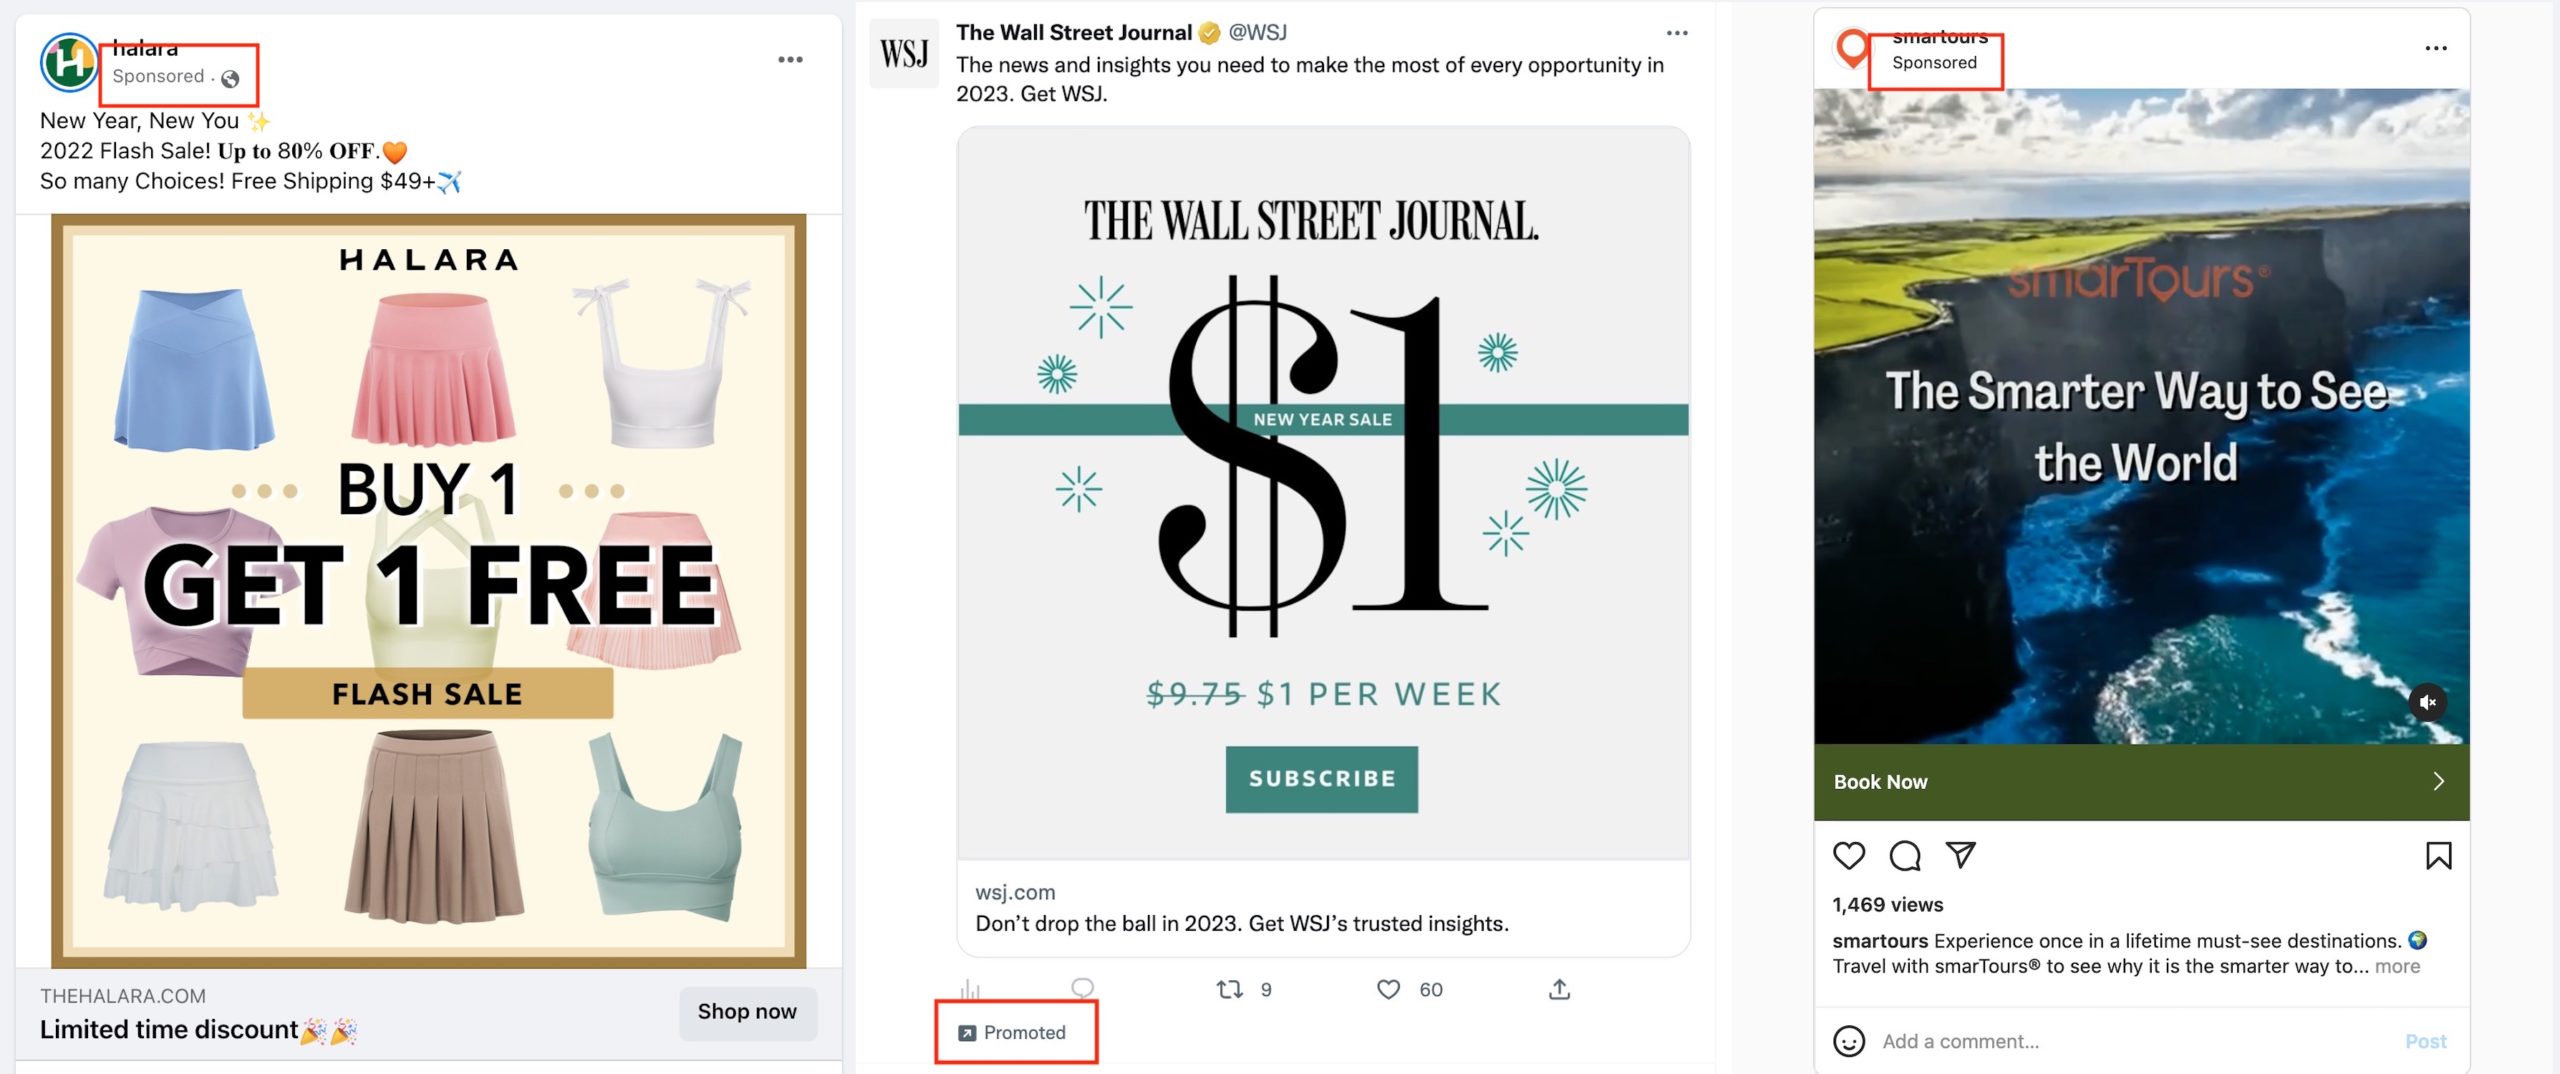 Screenshot collage of social media ads in feed for Halara's New Year's sale on Facebook, The Wall Street Journal subscription on Twitter, and Smarttours on Instagram